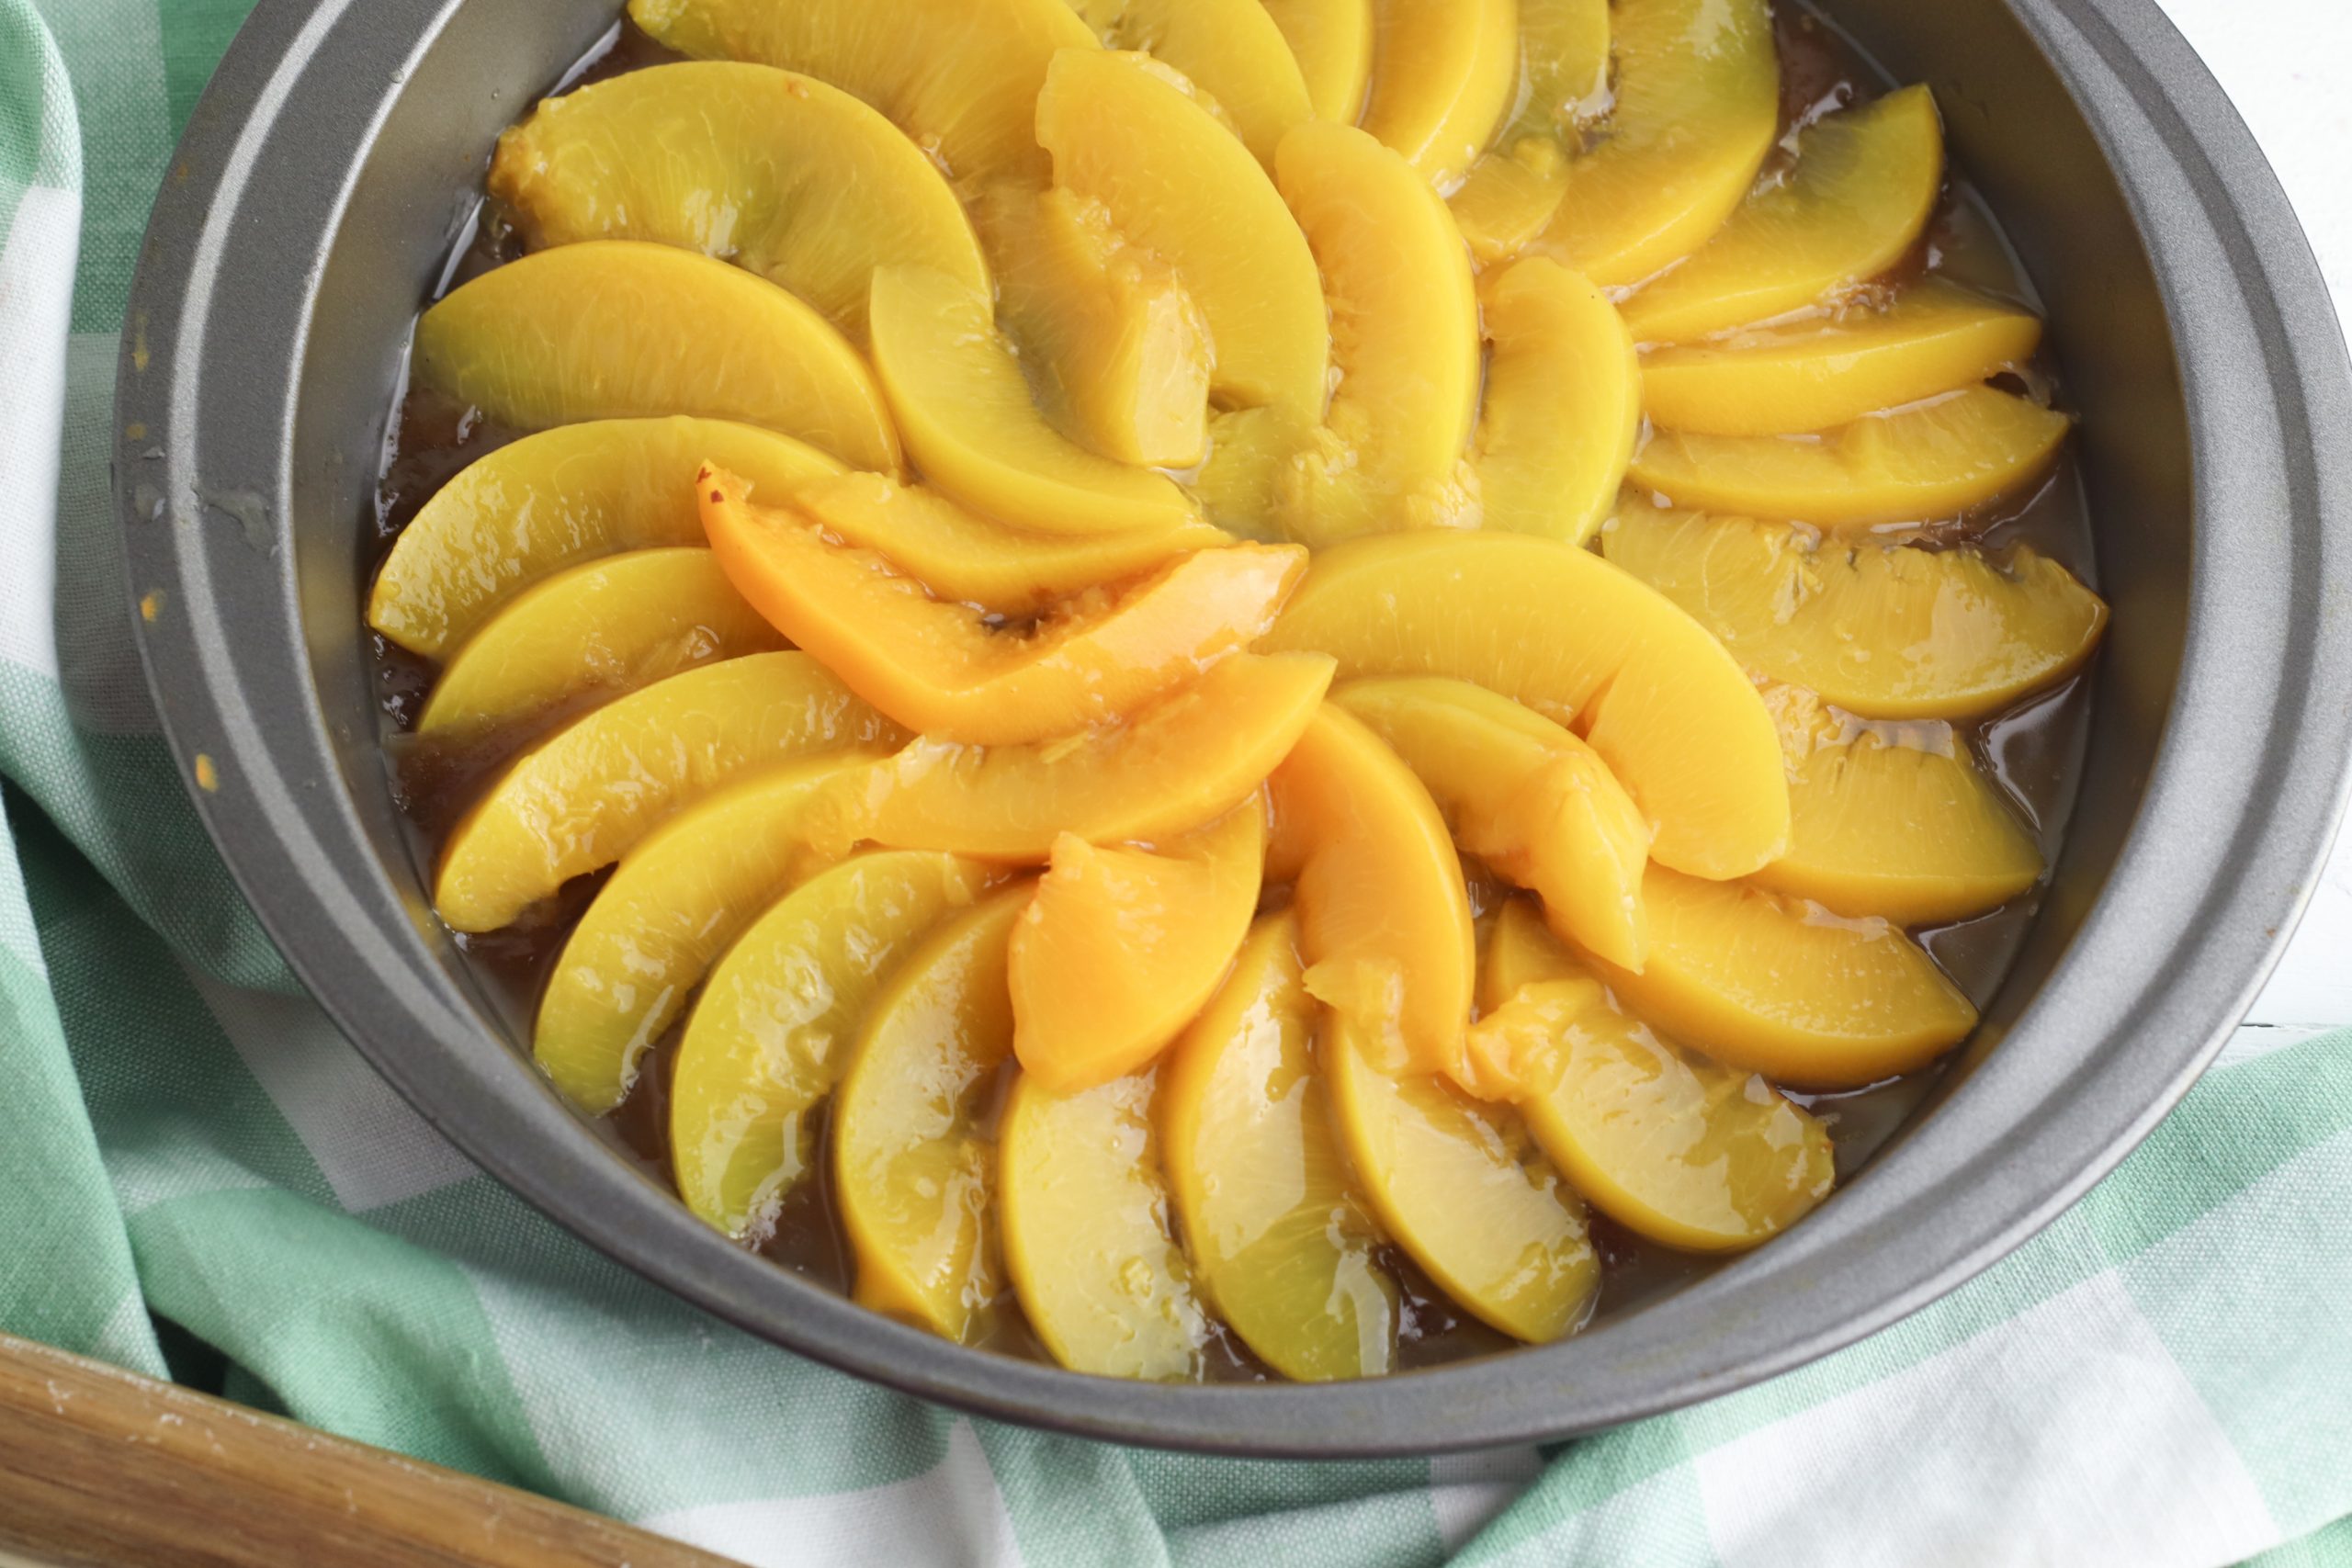 peach Upside Down Cake Instructions include putting the sliced peaches on a layer of cinnamon and brown sugar and butter. 